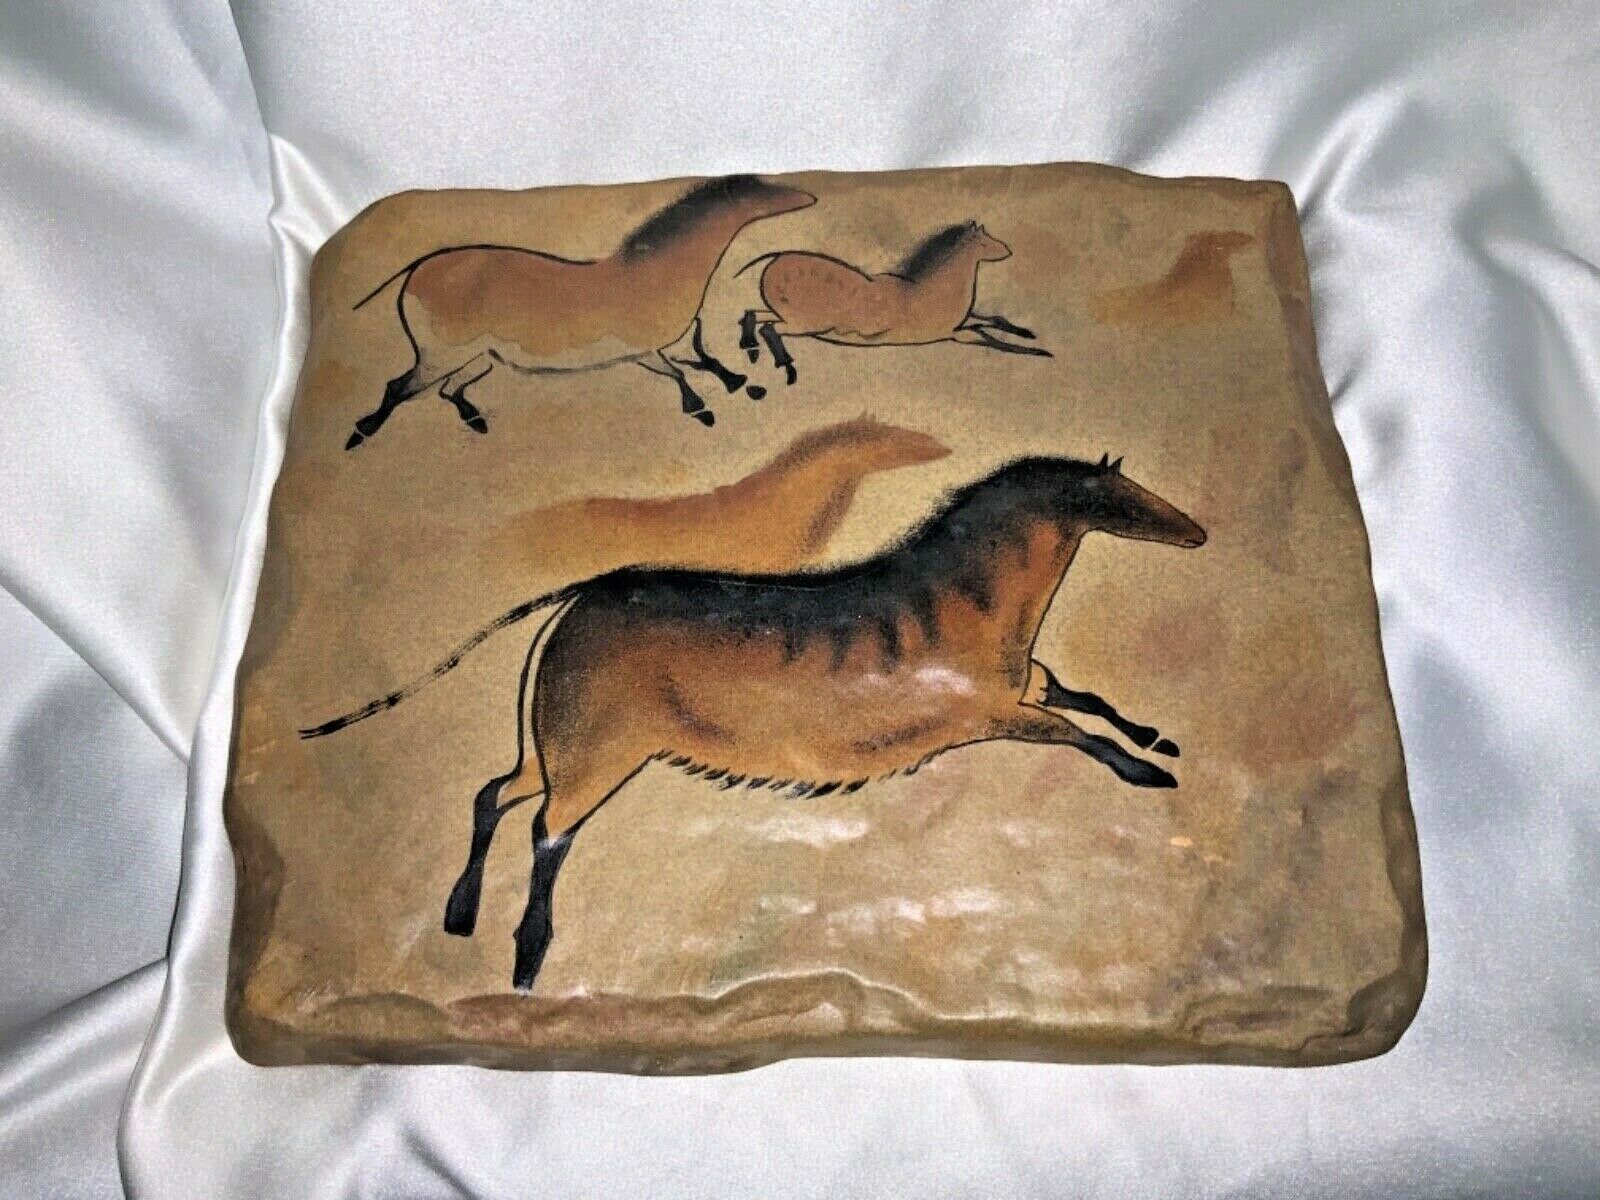 1999 Bradford Exchange The Dawn of Man Running Horses Stone Tile Wall Plaque - $35.00